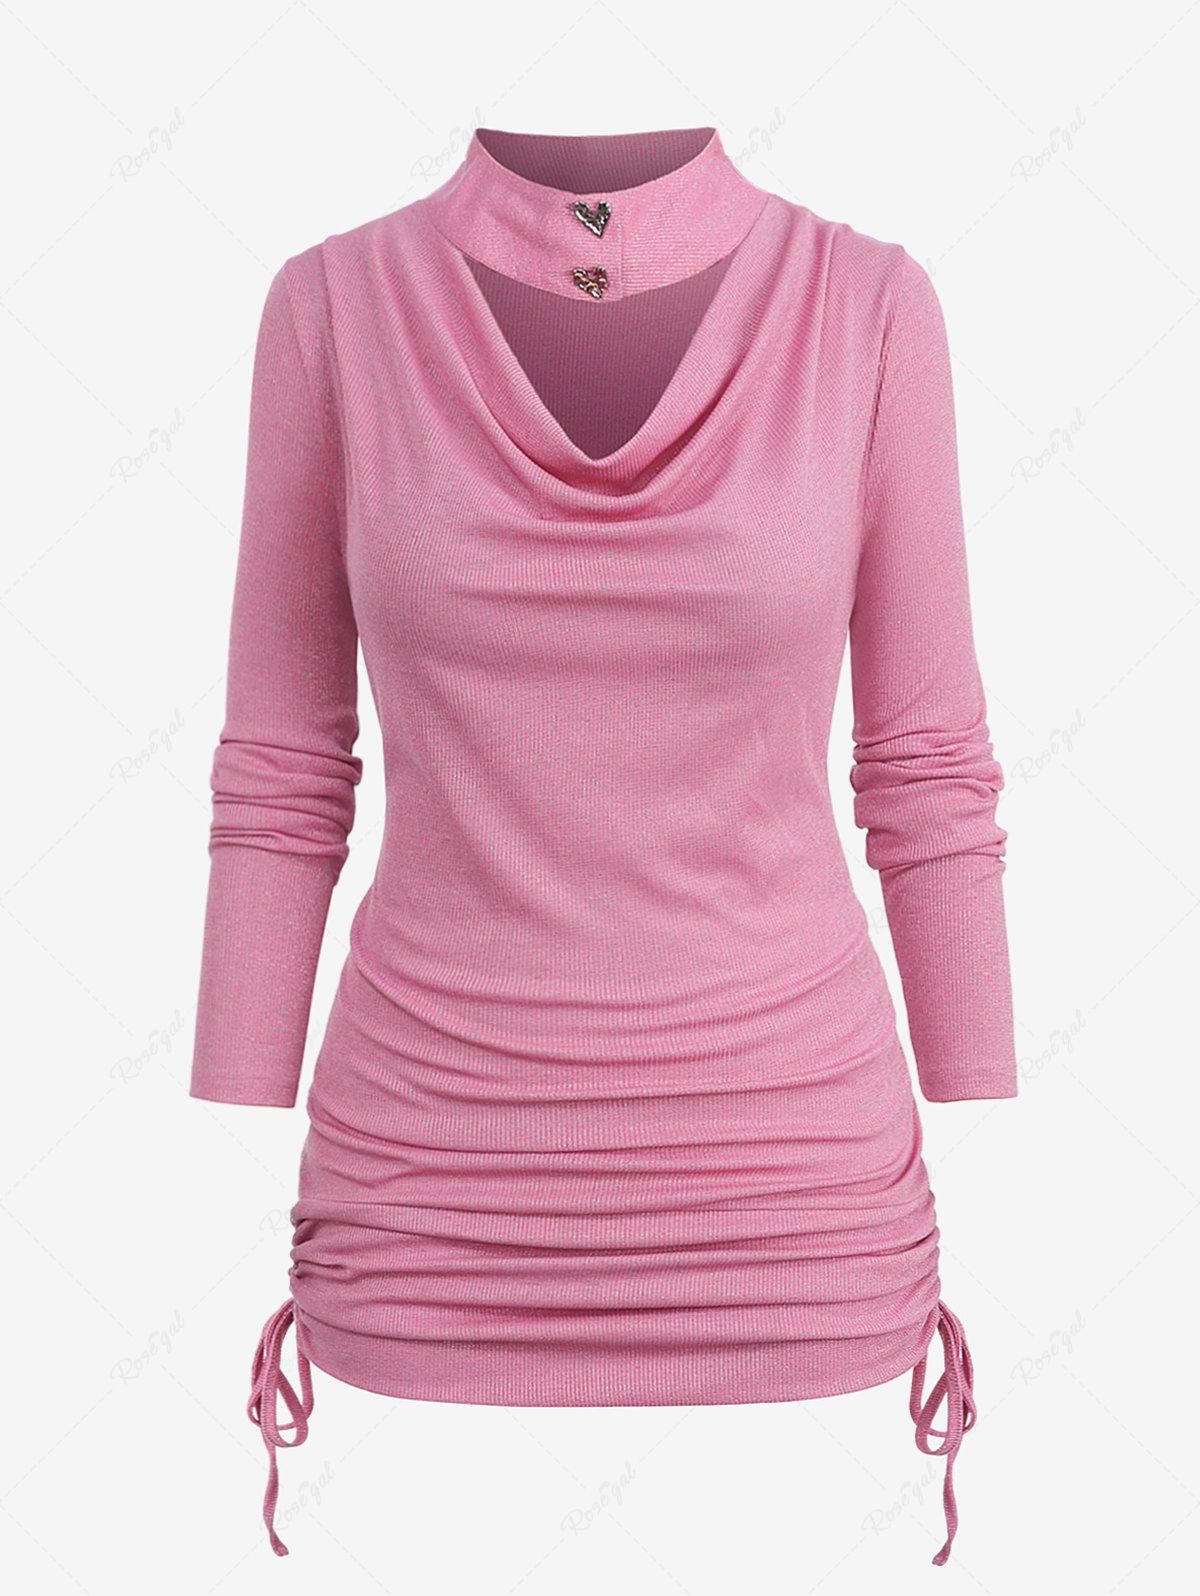 Plus Size Cowl Neck Detachable Collar Cinched Ruched Ribbed Solid Long Sleeves T-shirt Rose clair 1X | US 14-16